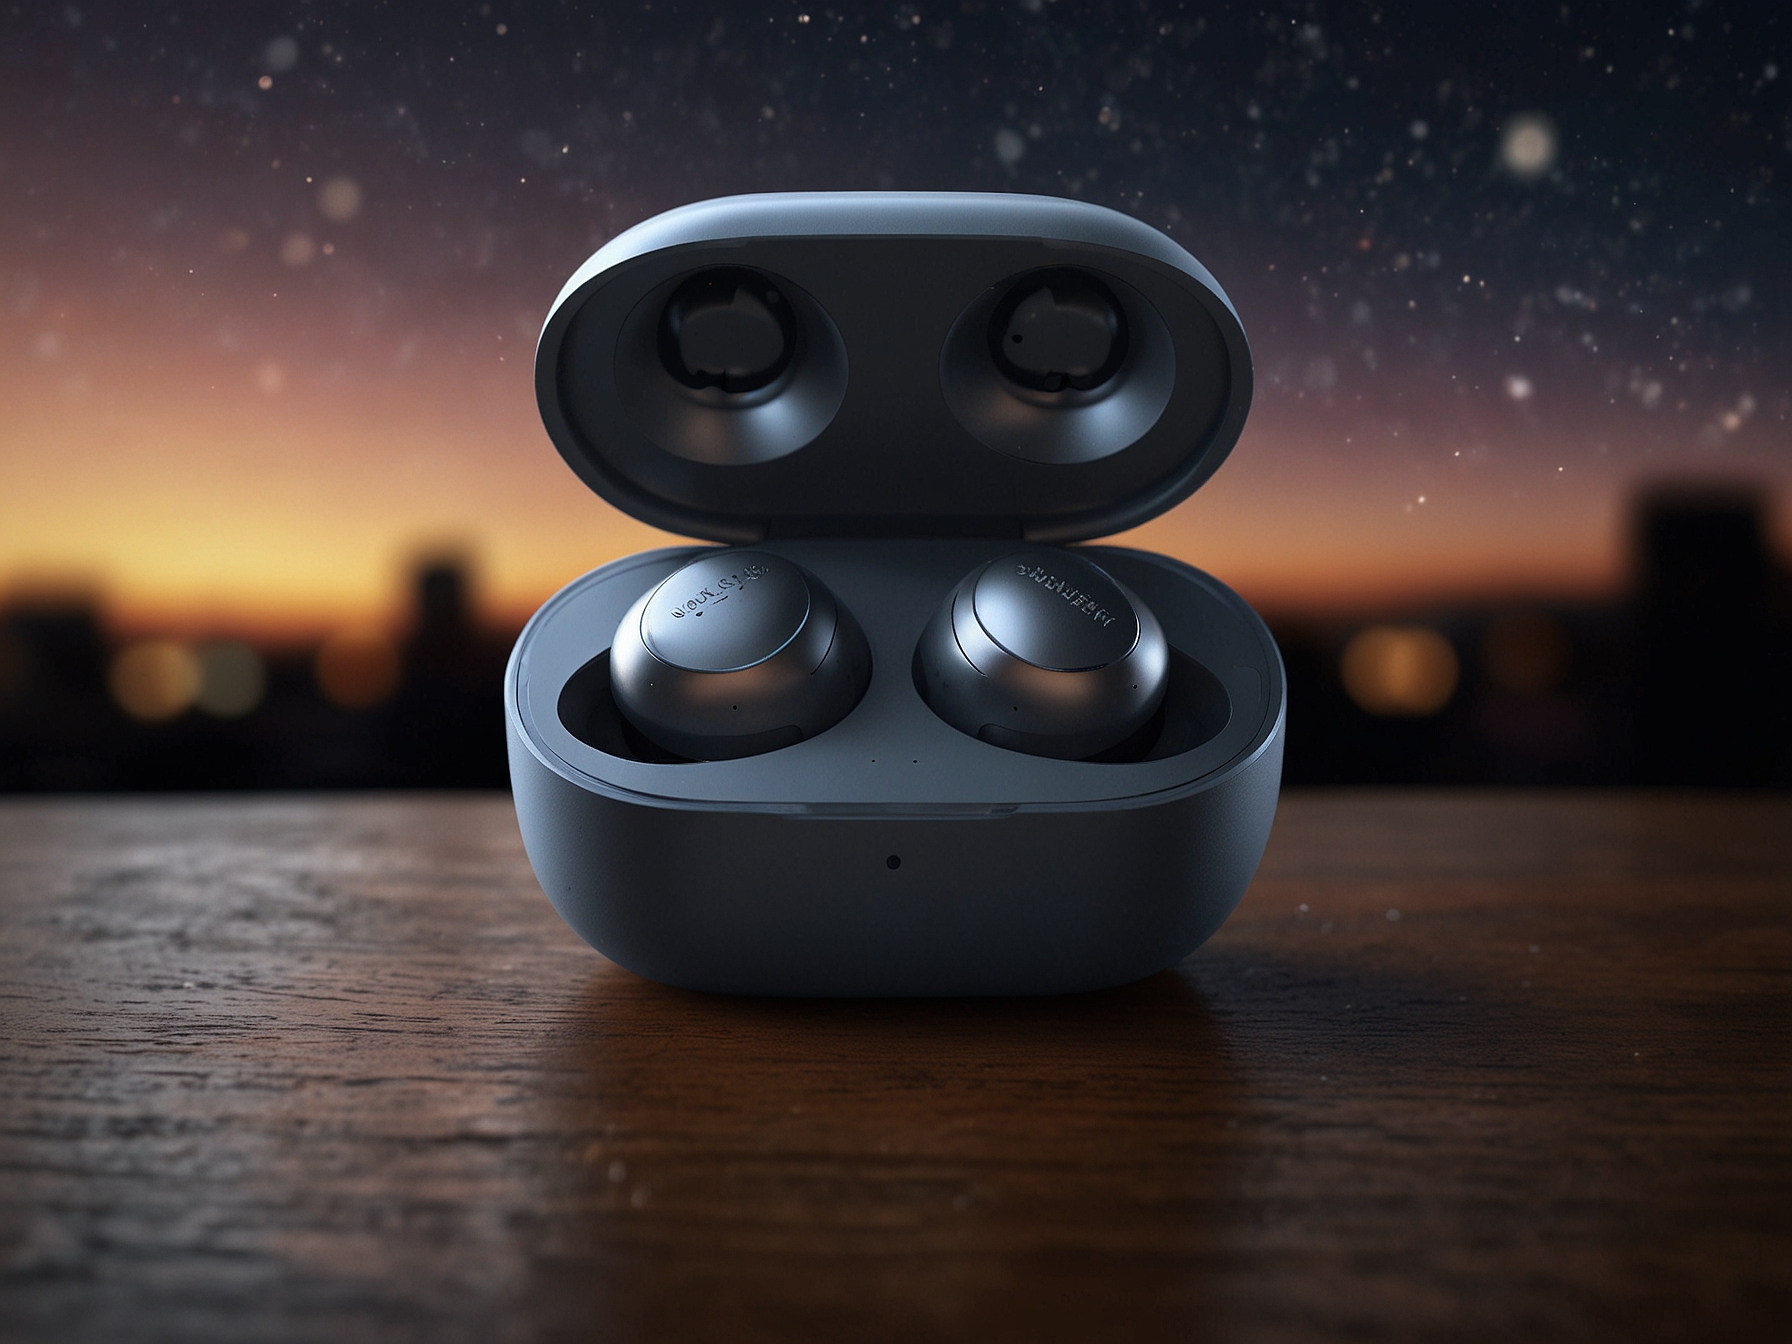 Concept render of the Galaxy Buds 3 showcasing the redesigned ergonomic earbuds with advanced features like noise cancellation and extended battery life.